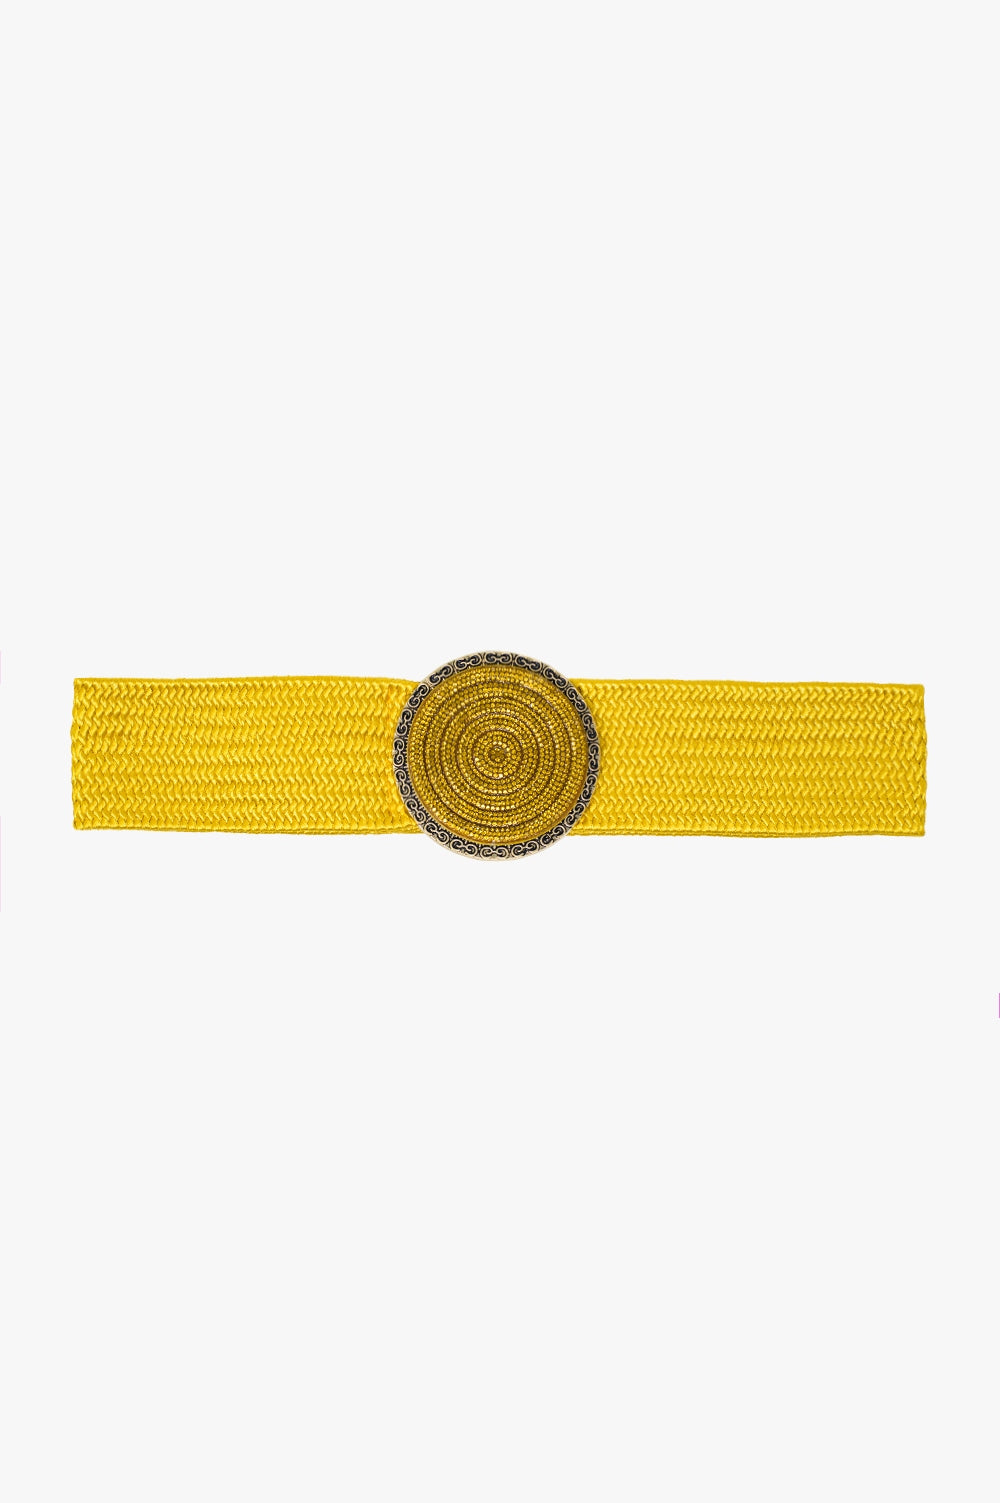 Q2 Yellow woven belt with round buckle with rhinestones